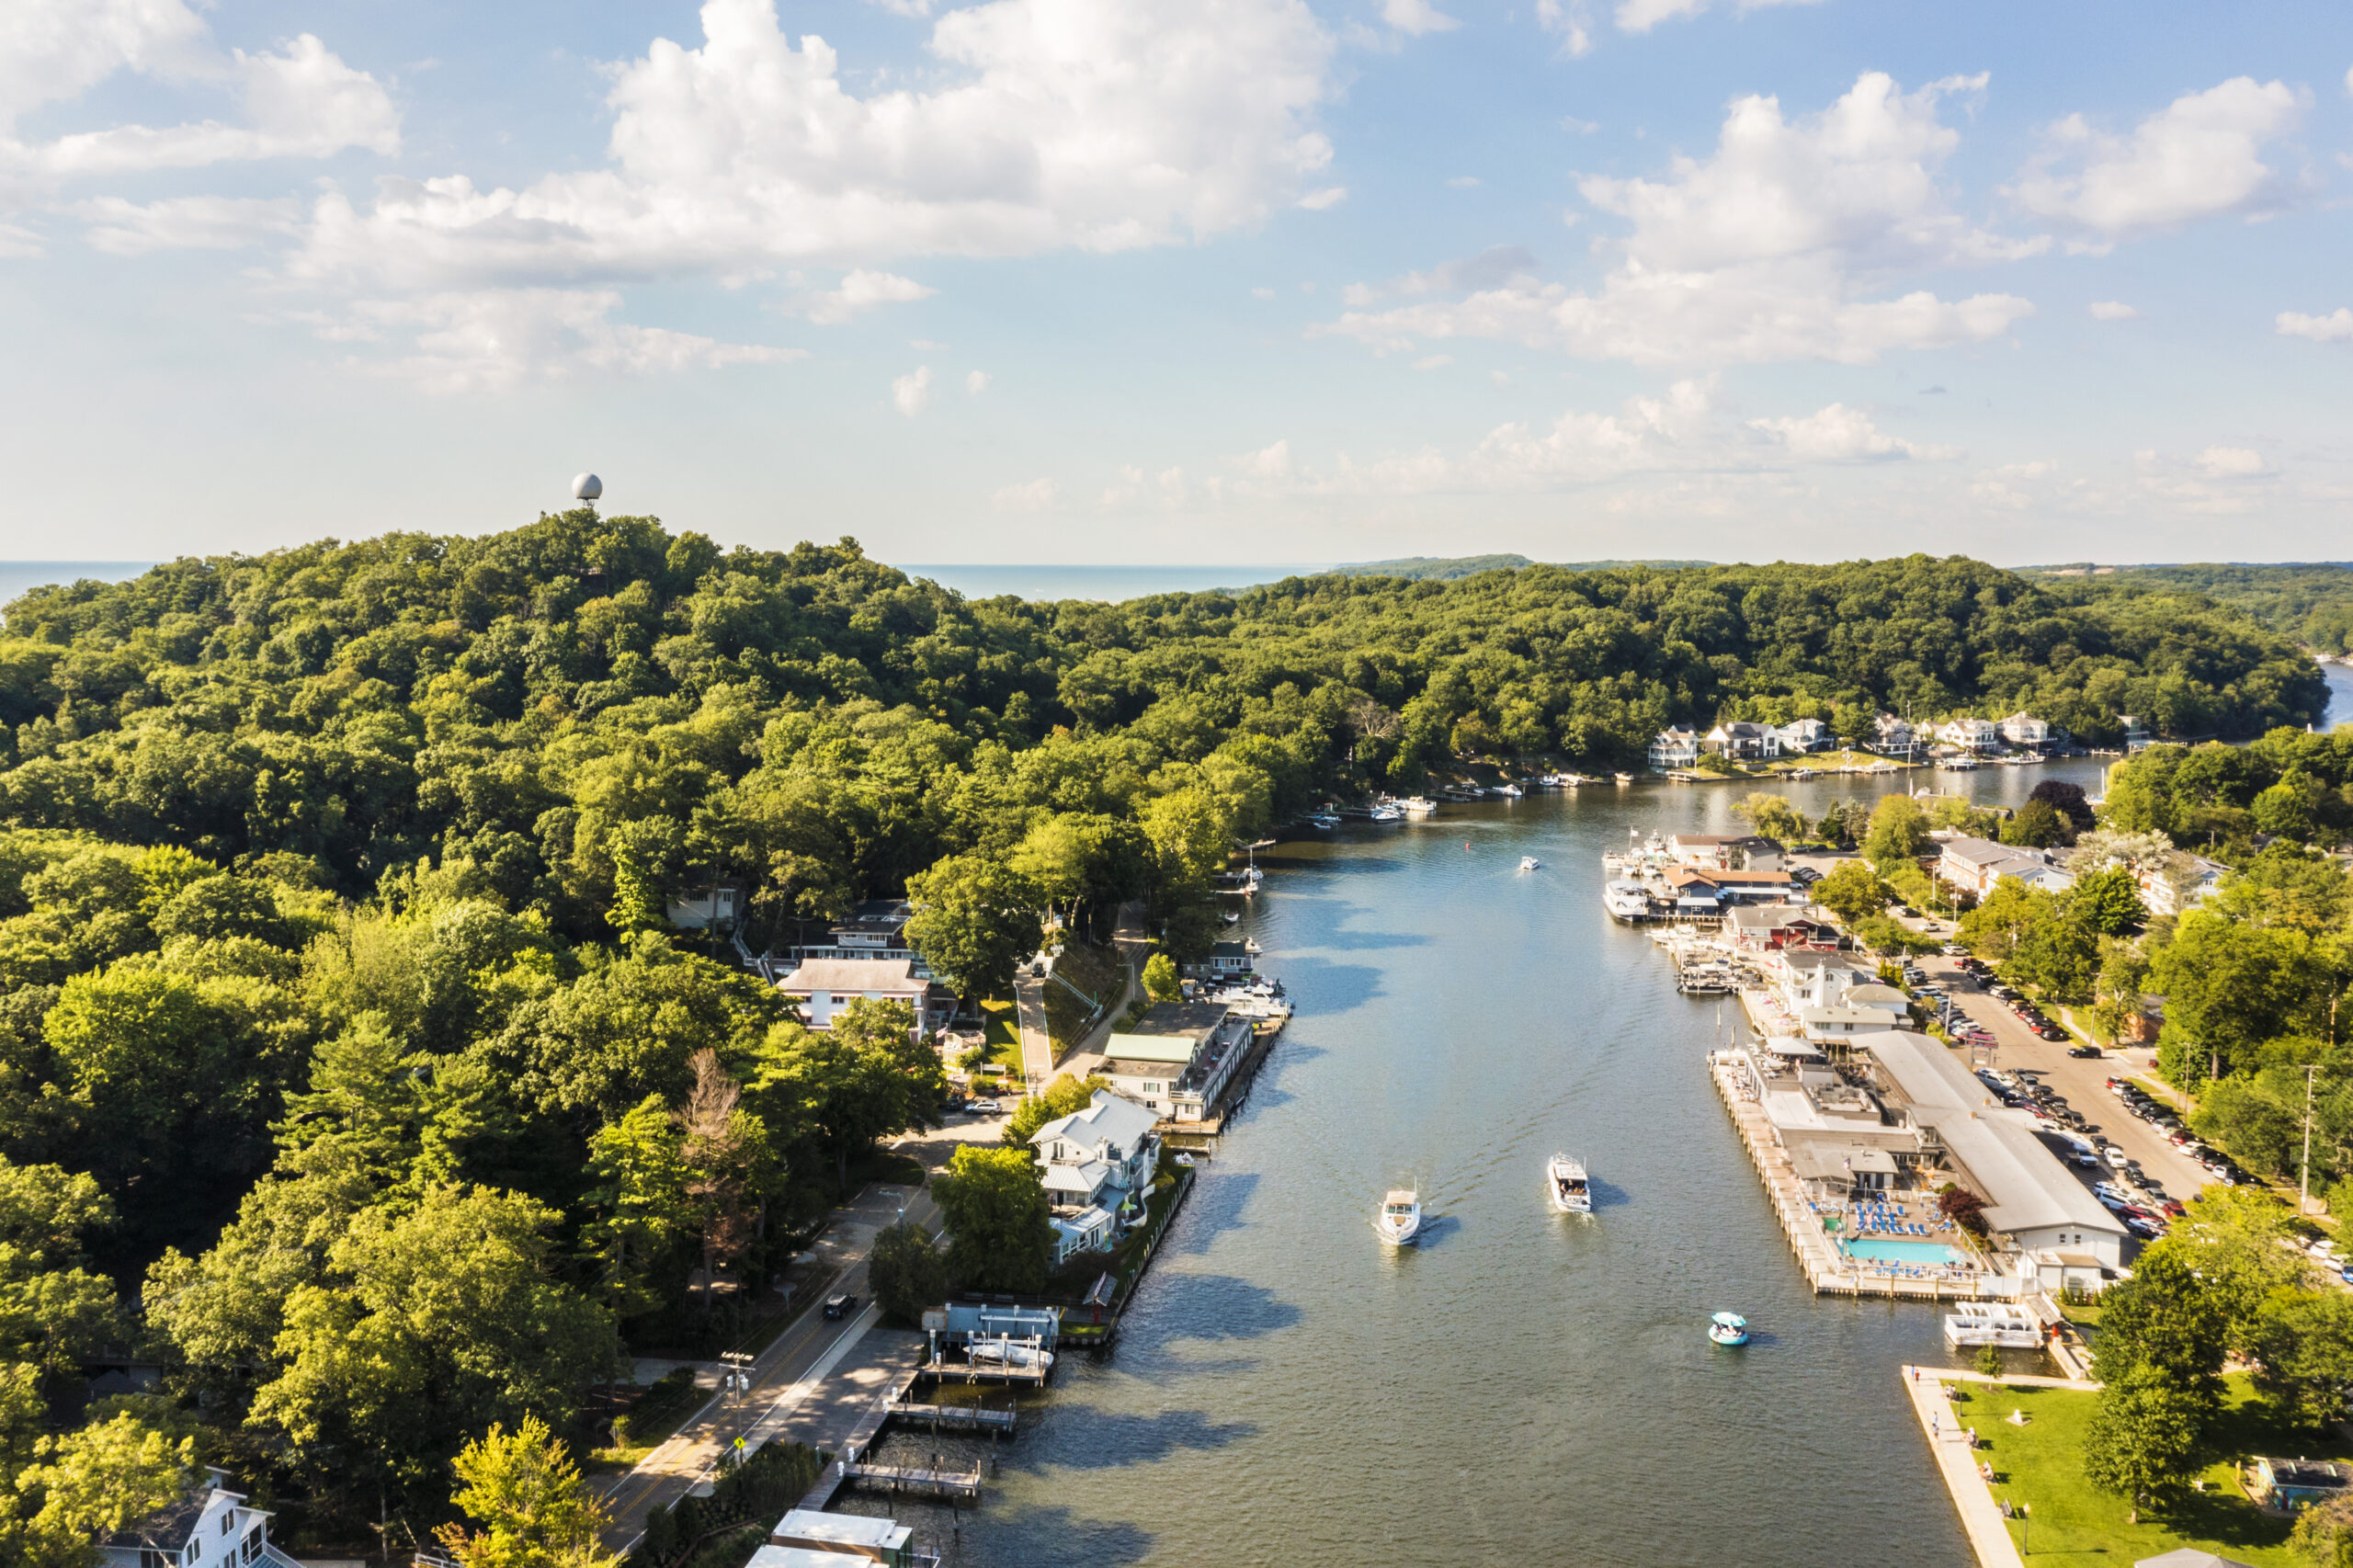 An aerial view showing downtown Saugatuck and the Kalamazoo River.